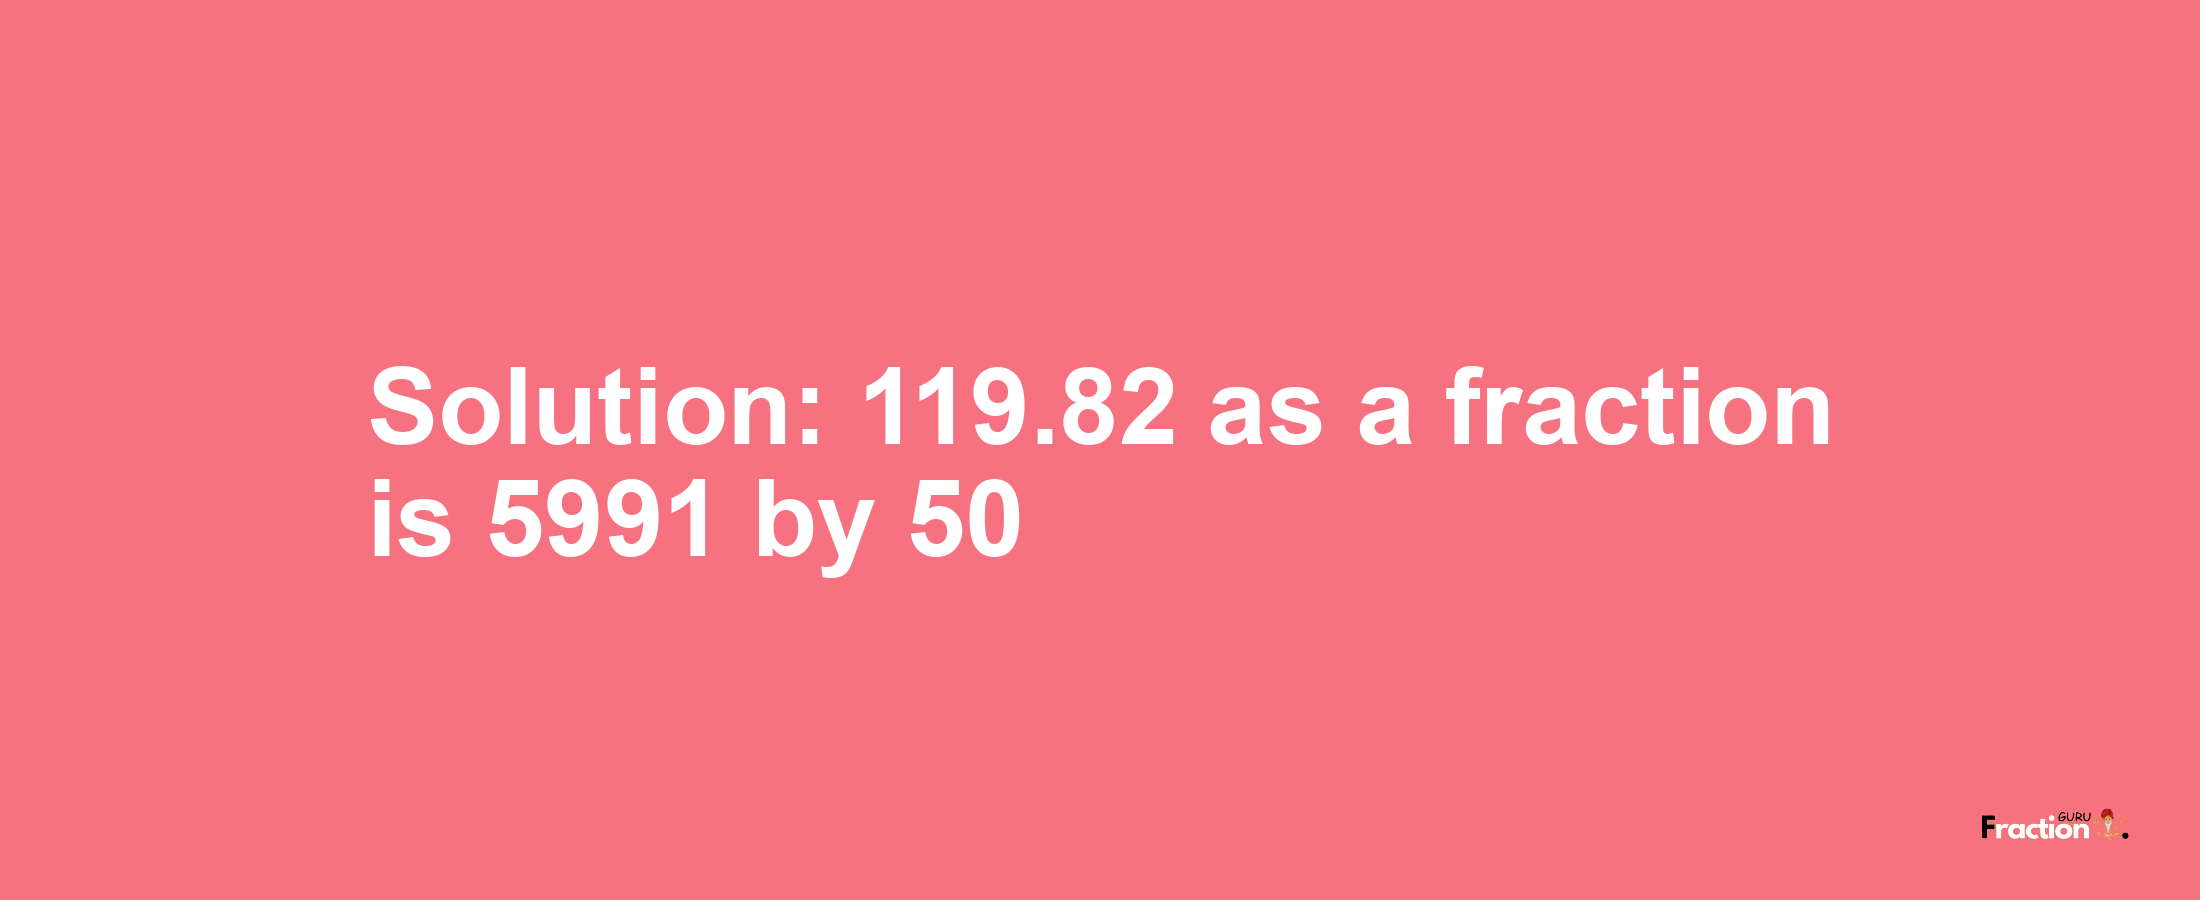 Solution:119.82 as a fraction is 5991/50